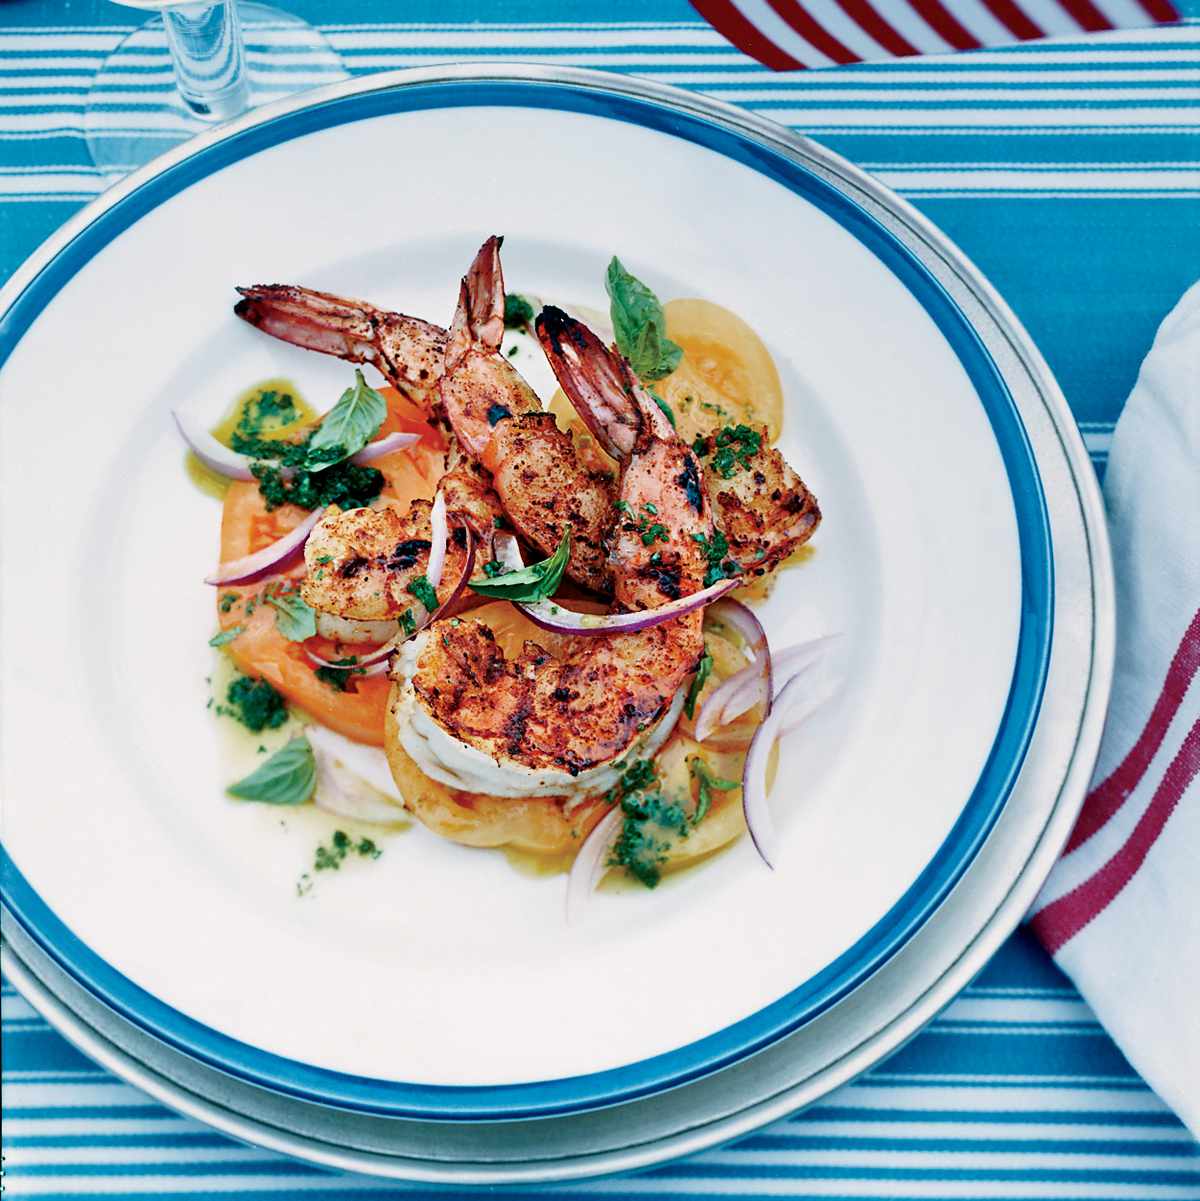 Barbecued Spiced Shrimp with Tomato Salad 